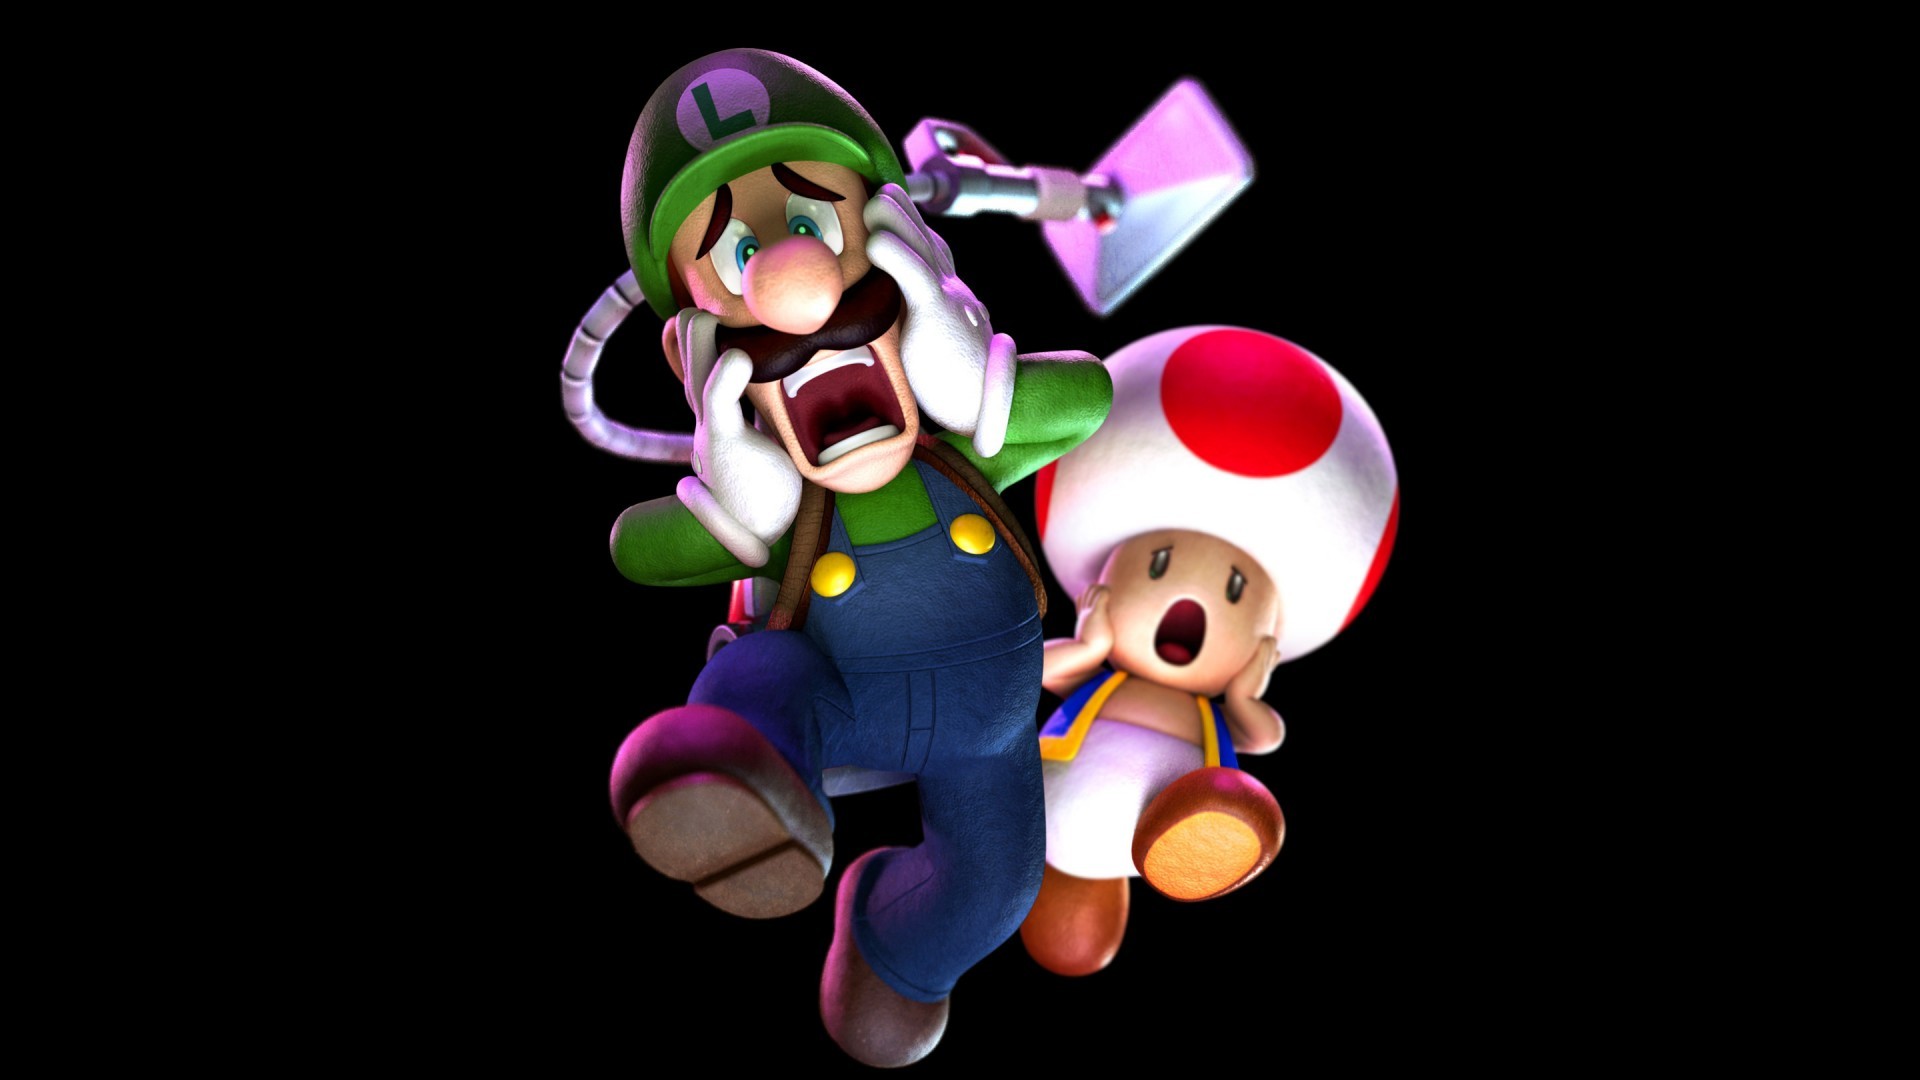 1920x1080 Mario and luigi background wallpapers HD.